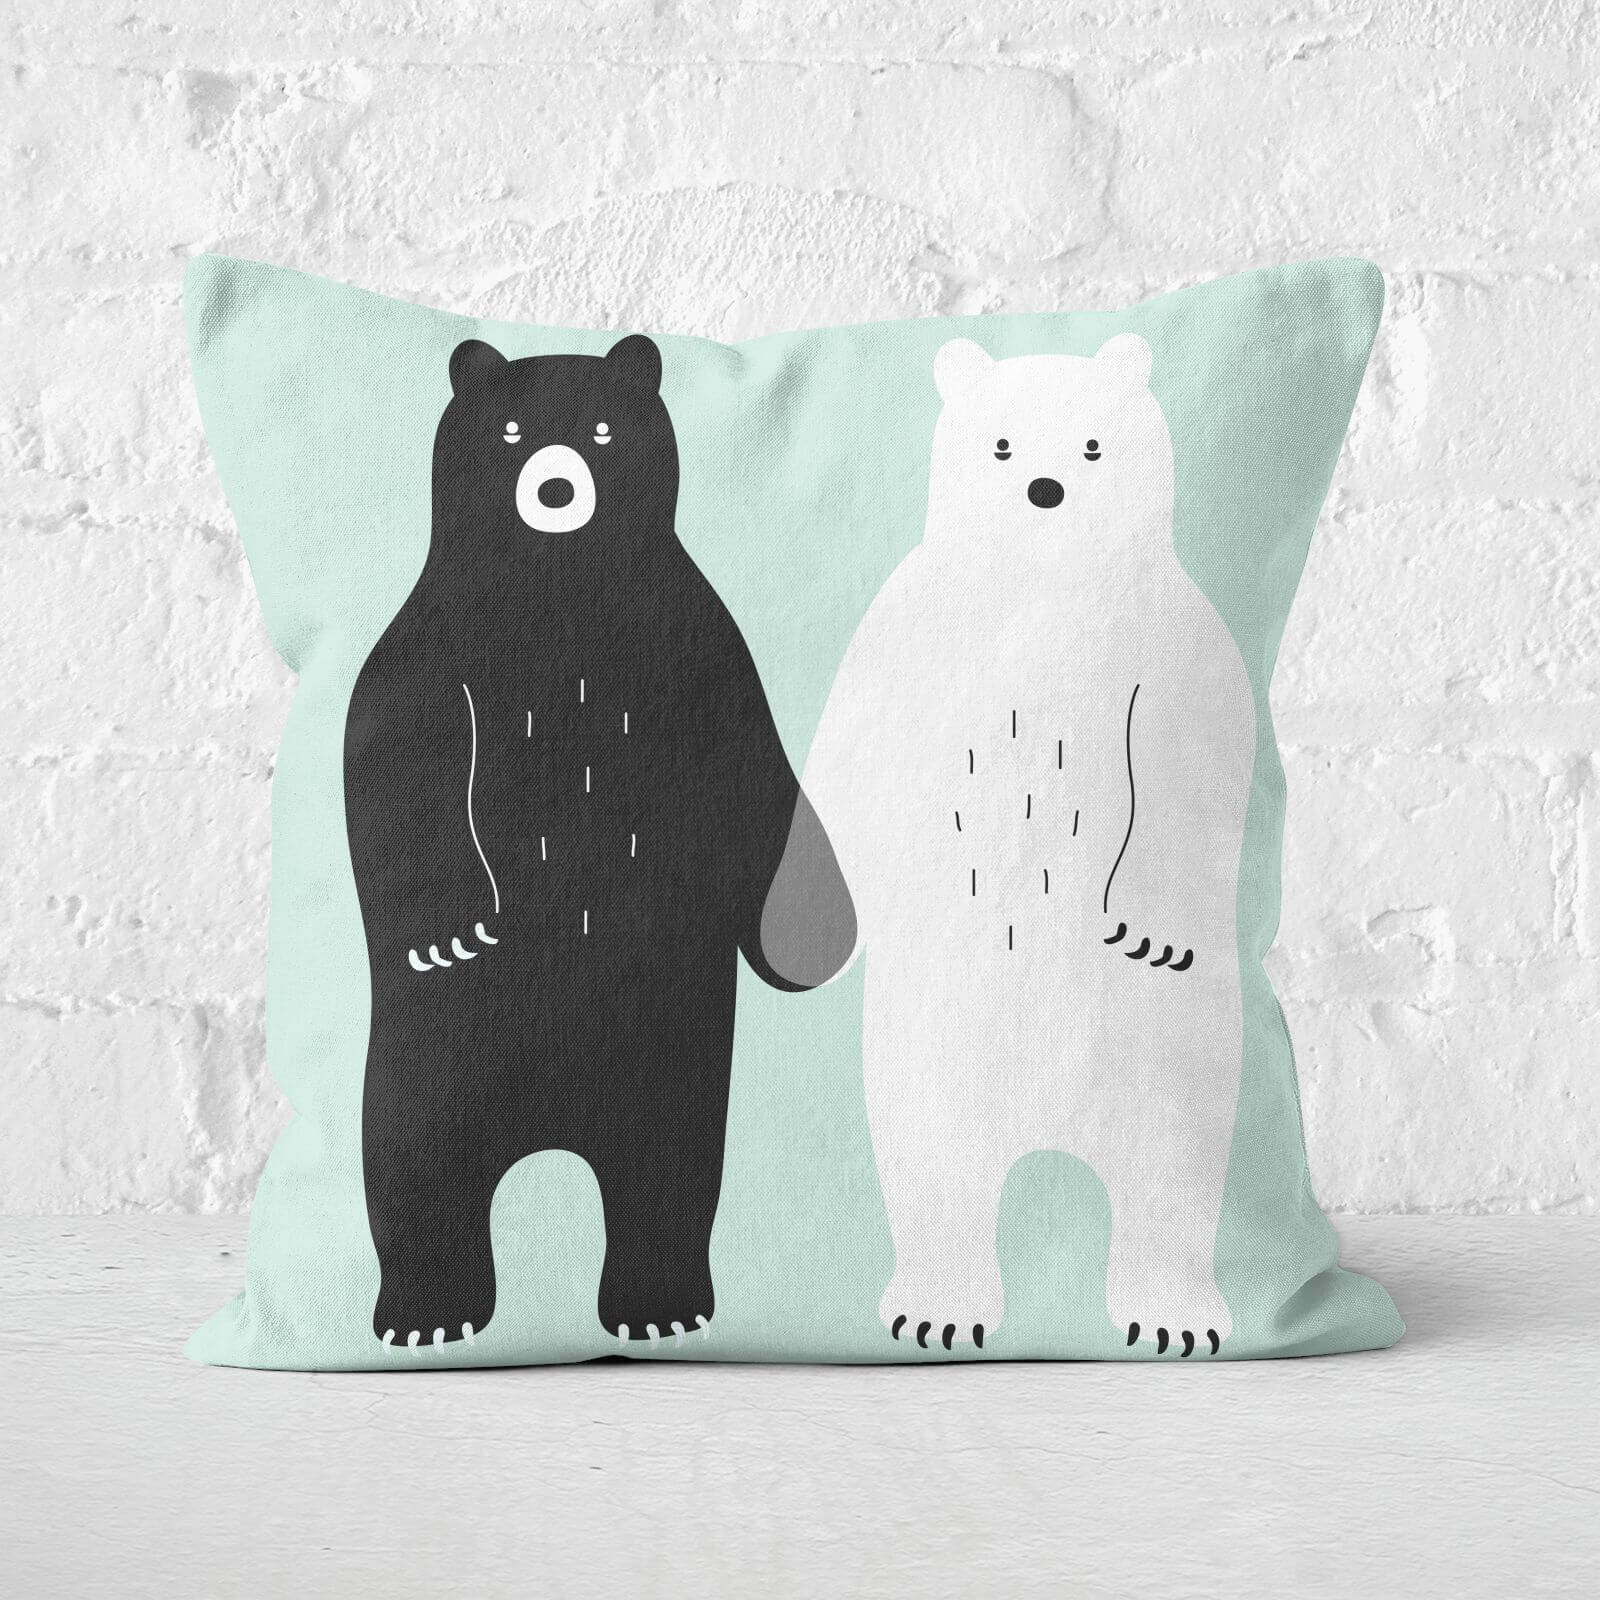 Andy Westface Gray Square Cushion - 60x60cm - Soft Touch